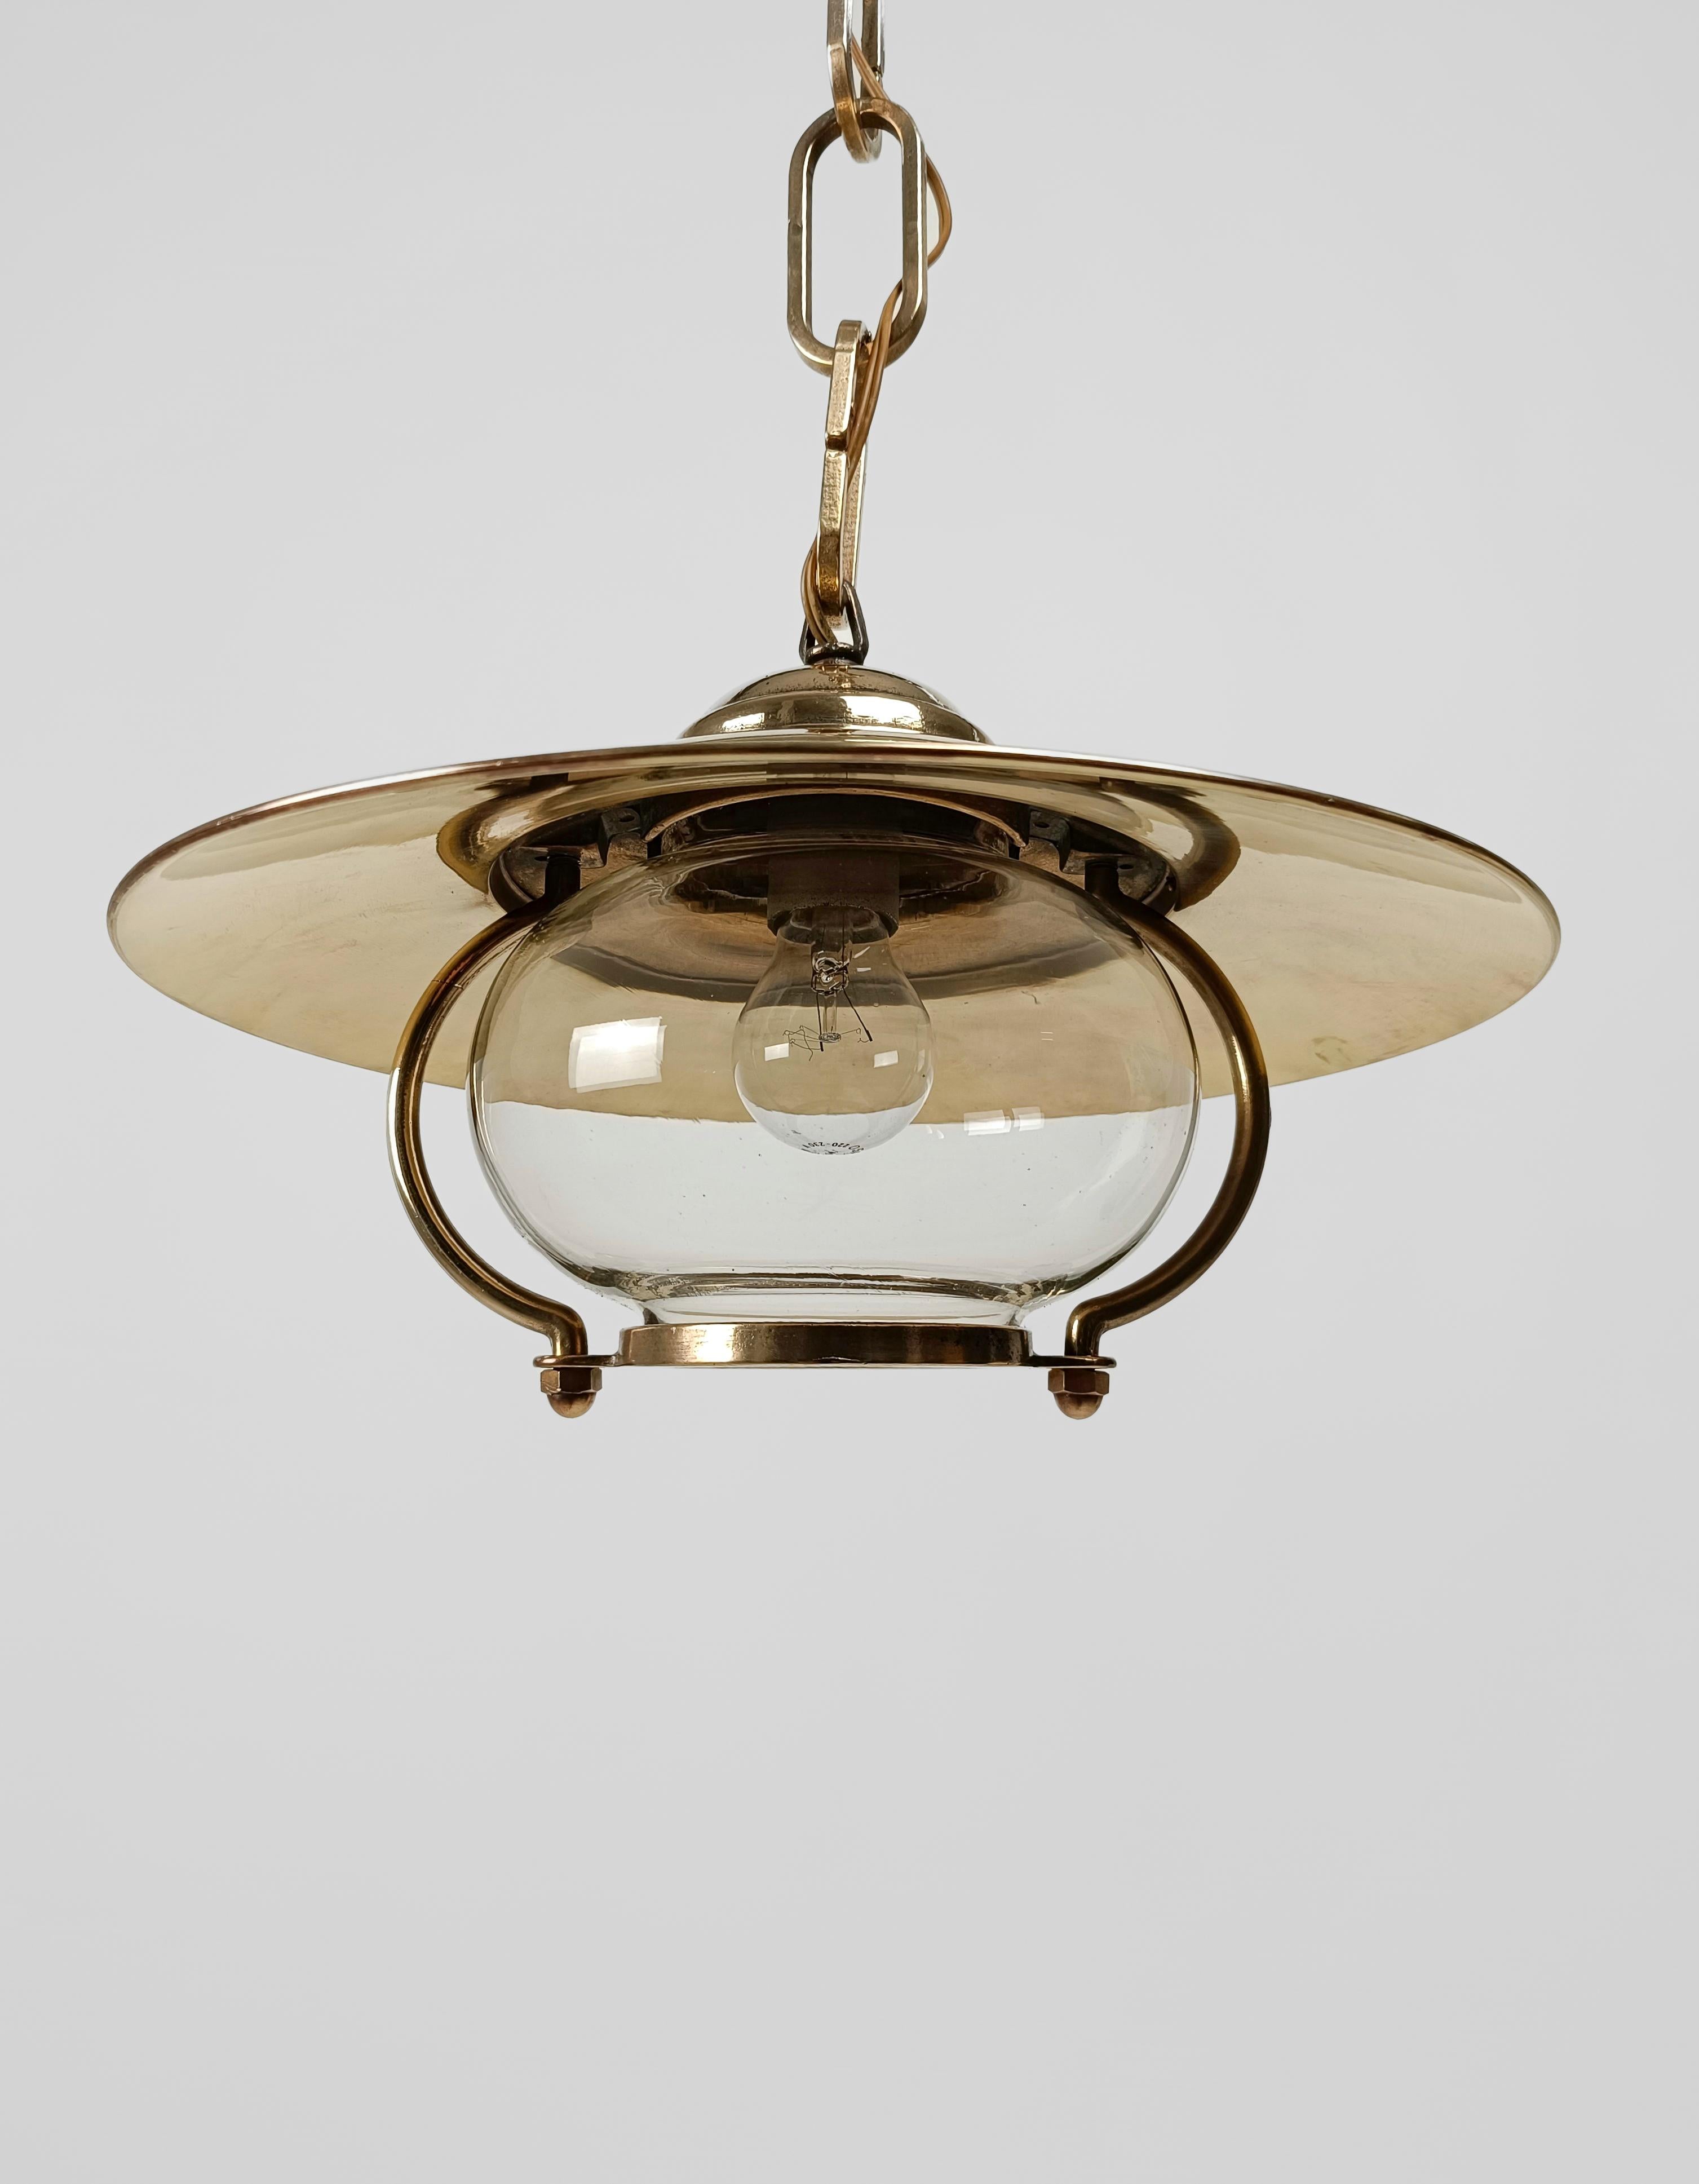 A high quality Navy Pendant Lamp, probably made in Italy between the 50s and 60s and purchased by us from a house on the Riviera of Rome, namely Ostia
This vintage pendant was made of solid, full and heavy brass, the splendid hammered chain alone